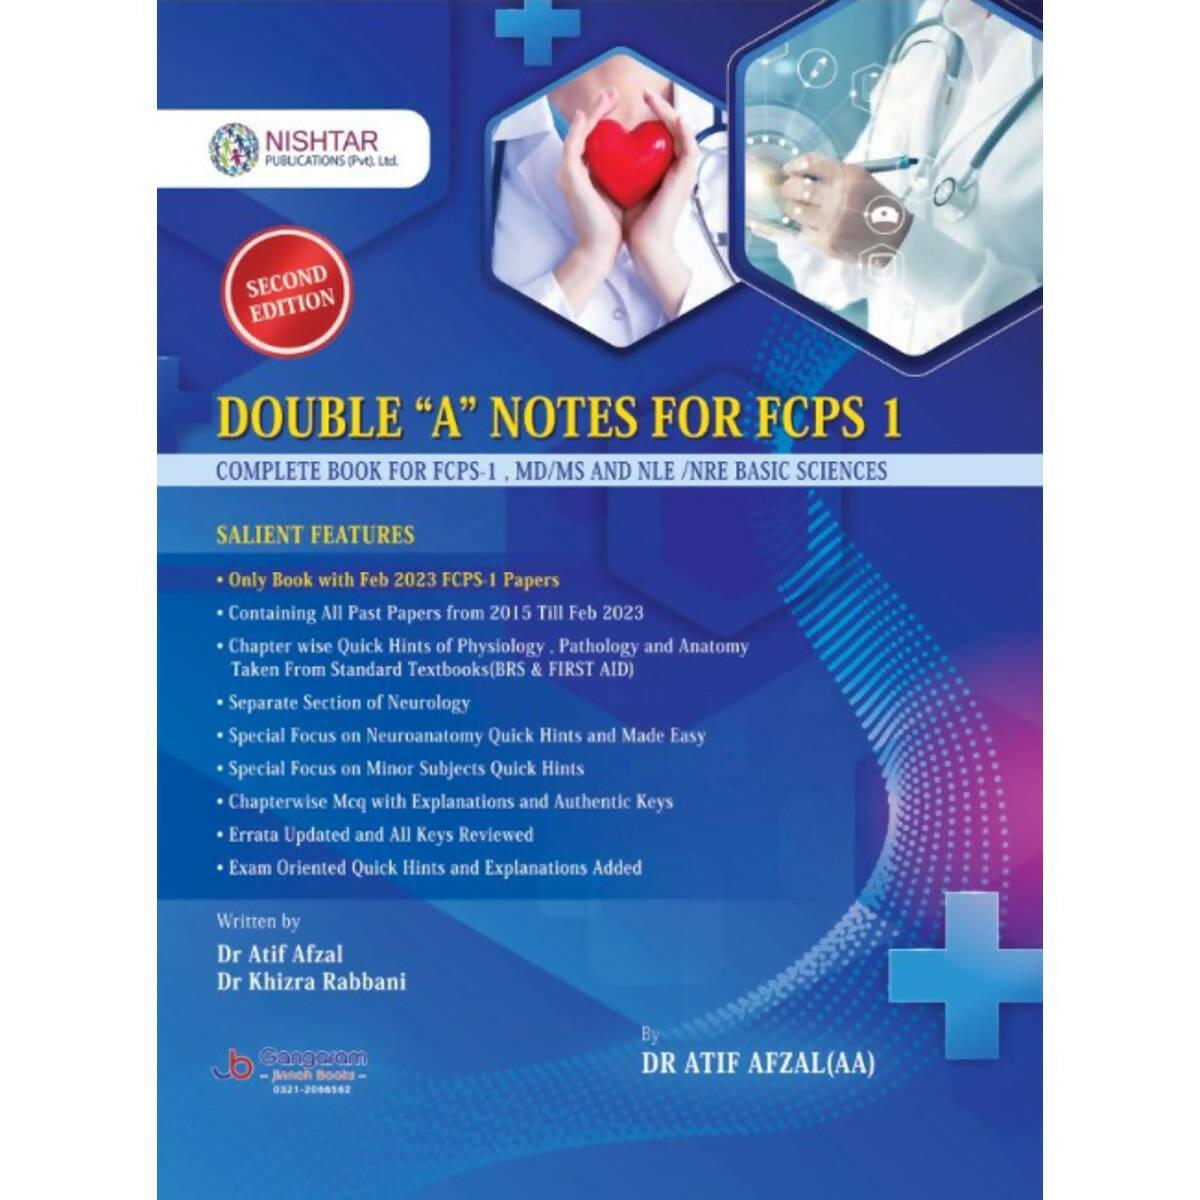 Double A Notes for FCPS 1 - ValueBox